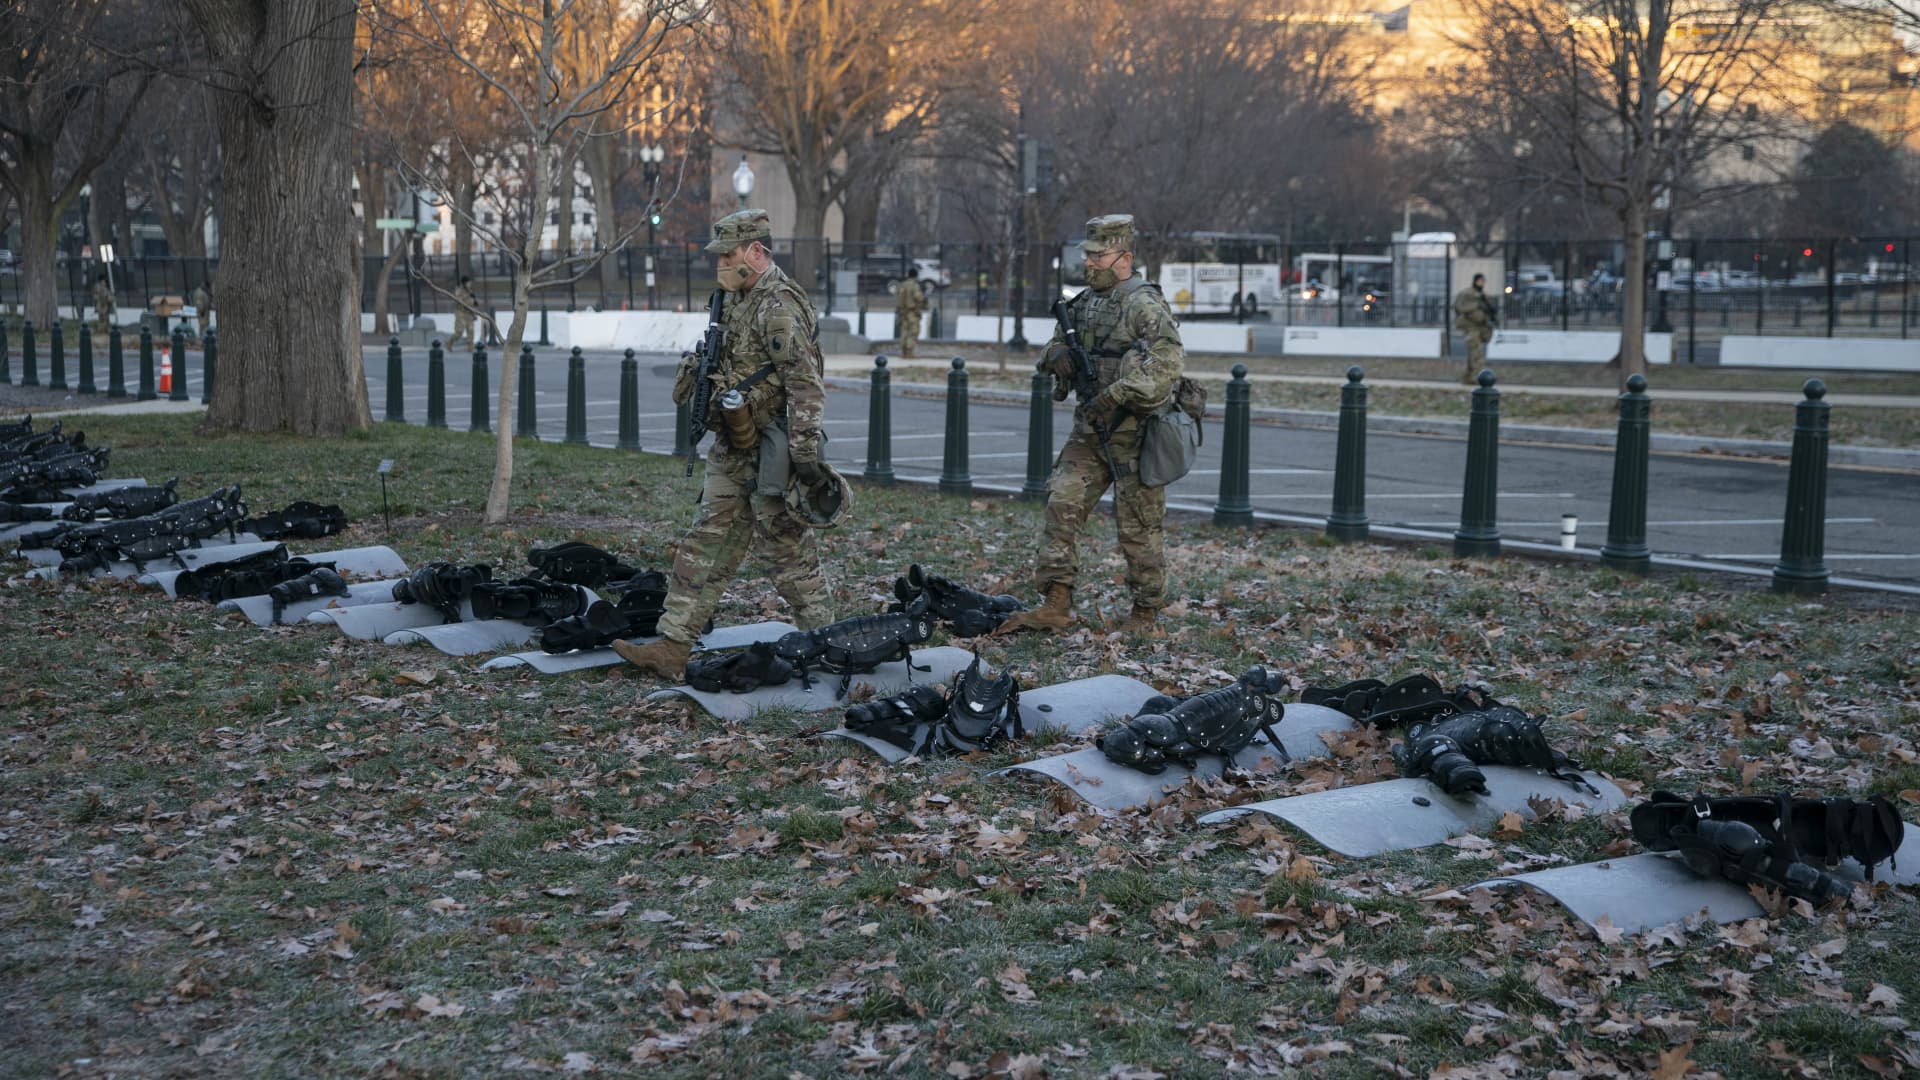 Members of the National Guard stand in front of riot shields and body armor on the lawn of the U.S. Capitol in Washington, D.C., U.S., on Wednesday, Jan. 13, 2021.